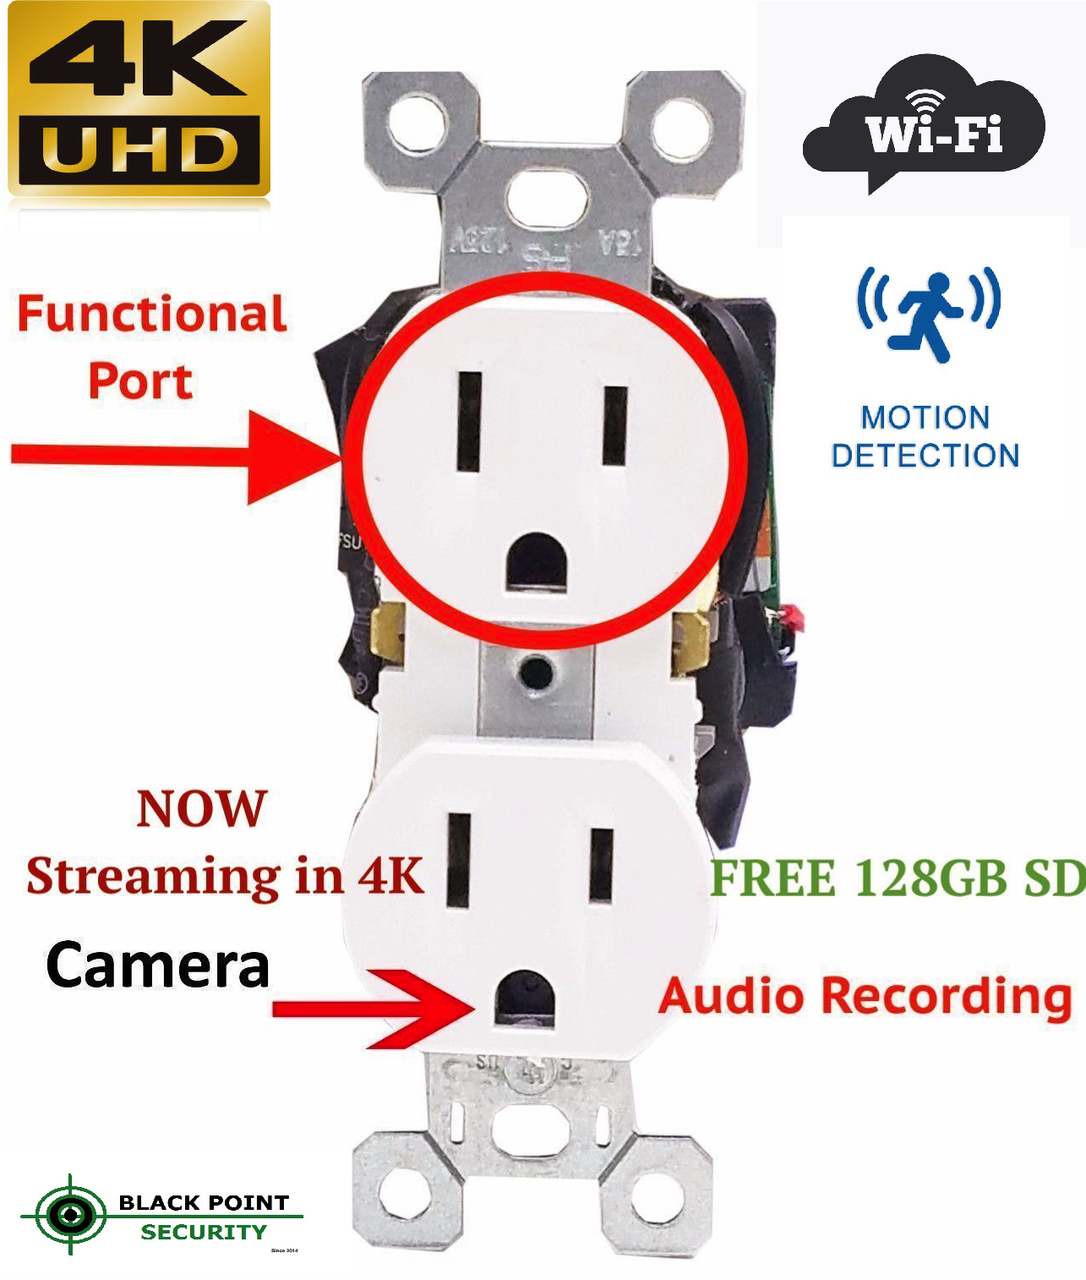 Spy 4K HD Camera with WIFI in AC Receptacle Functional Outlet